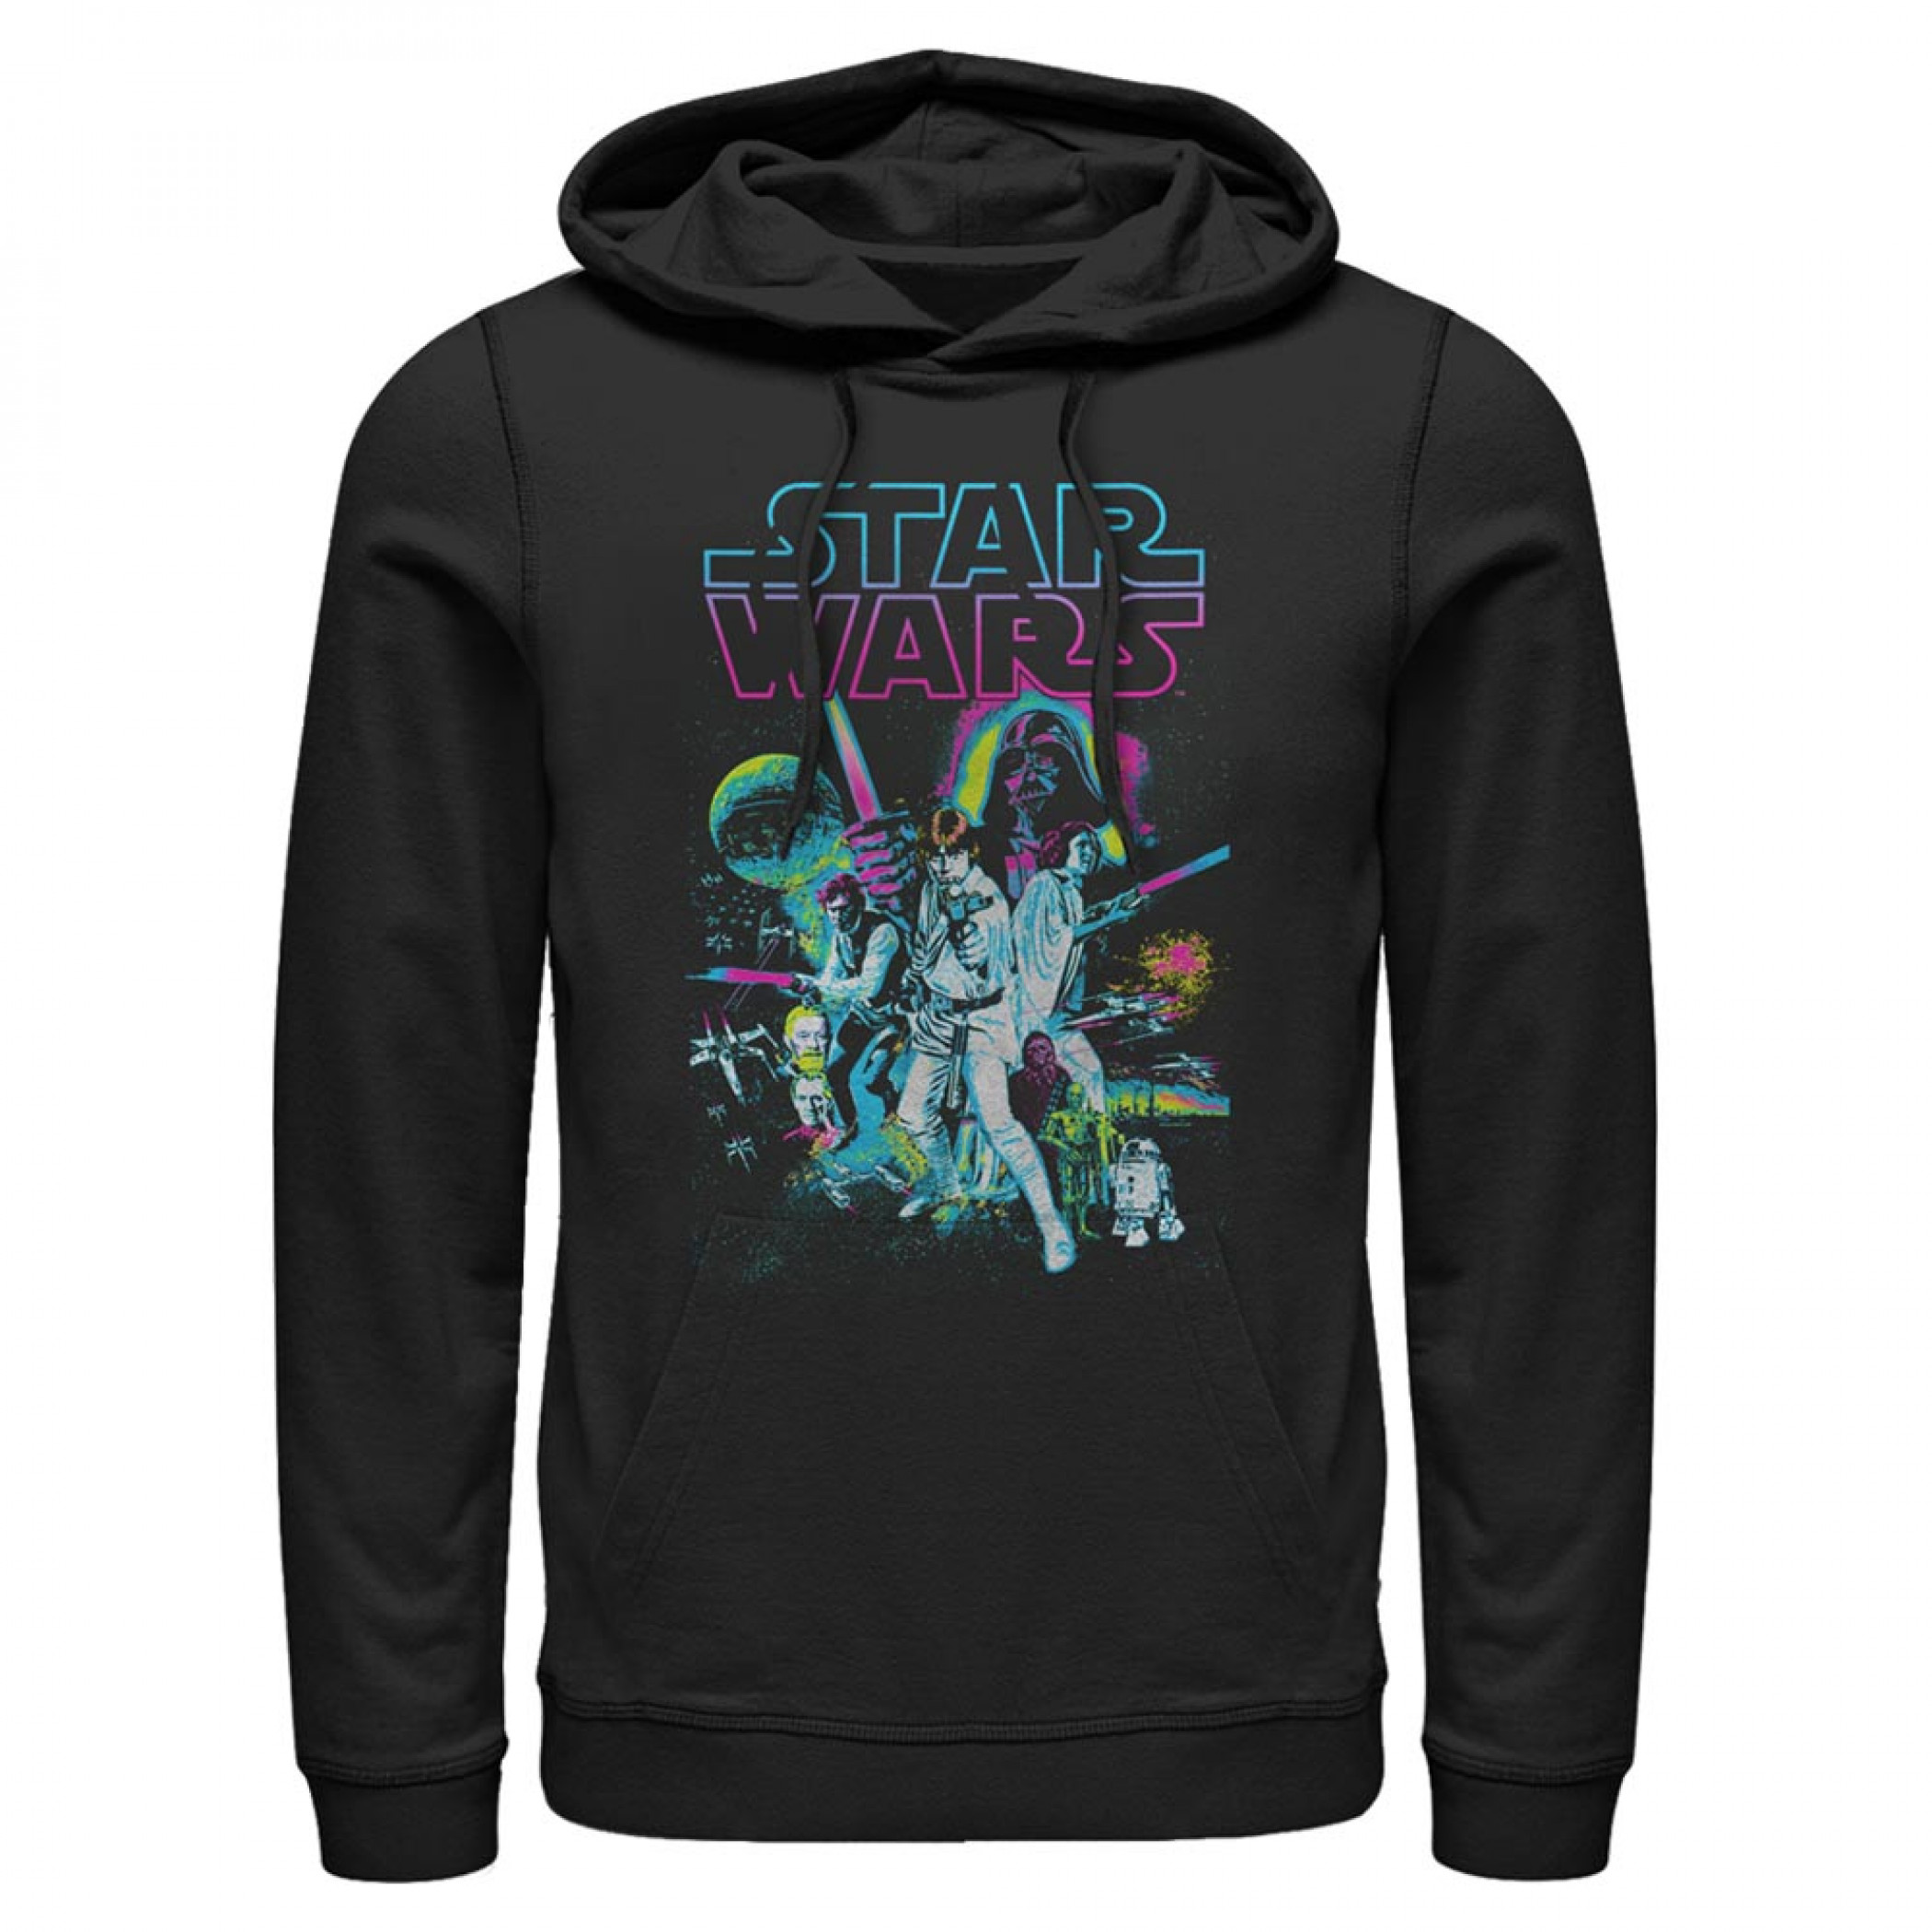 Star Wars a New Hope Neon Poster Pullover Hoodie